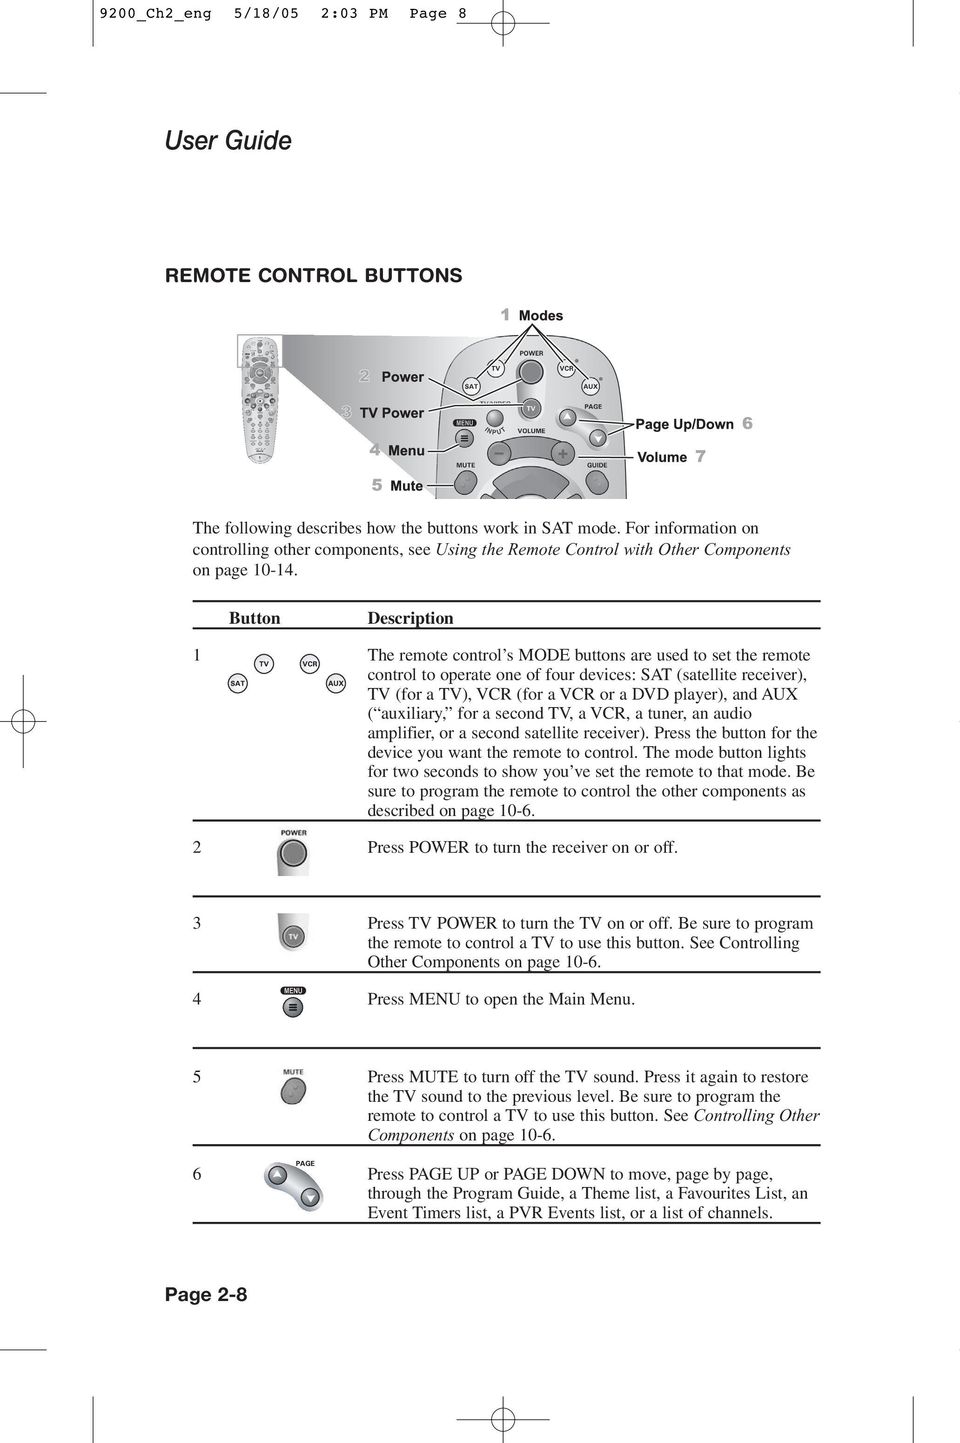 Button Description 1 The remote control s MODE buttons are used to set the remote control to operate one of four devices: SAT (satellite receiver), TV (for a TV), VCR (for a VCR or a DVD player), and